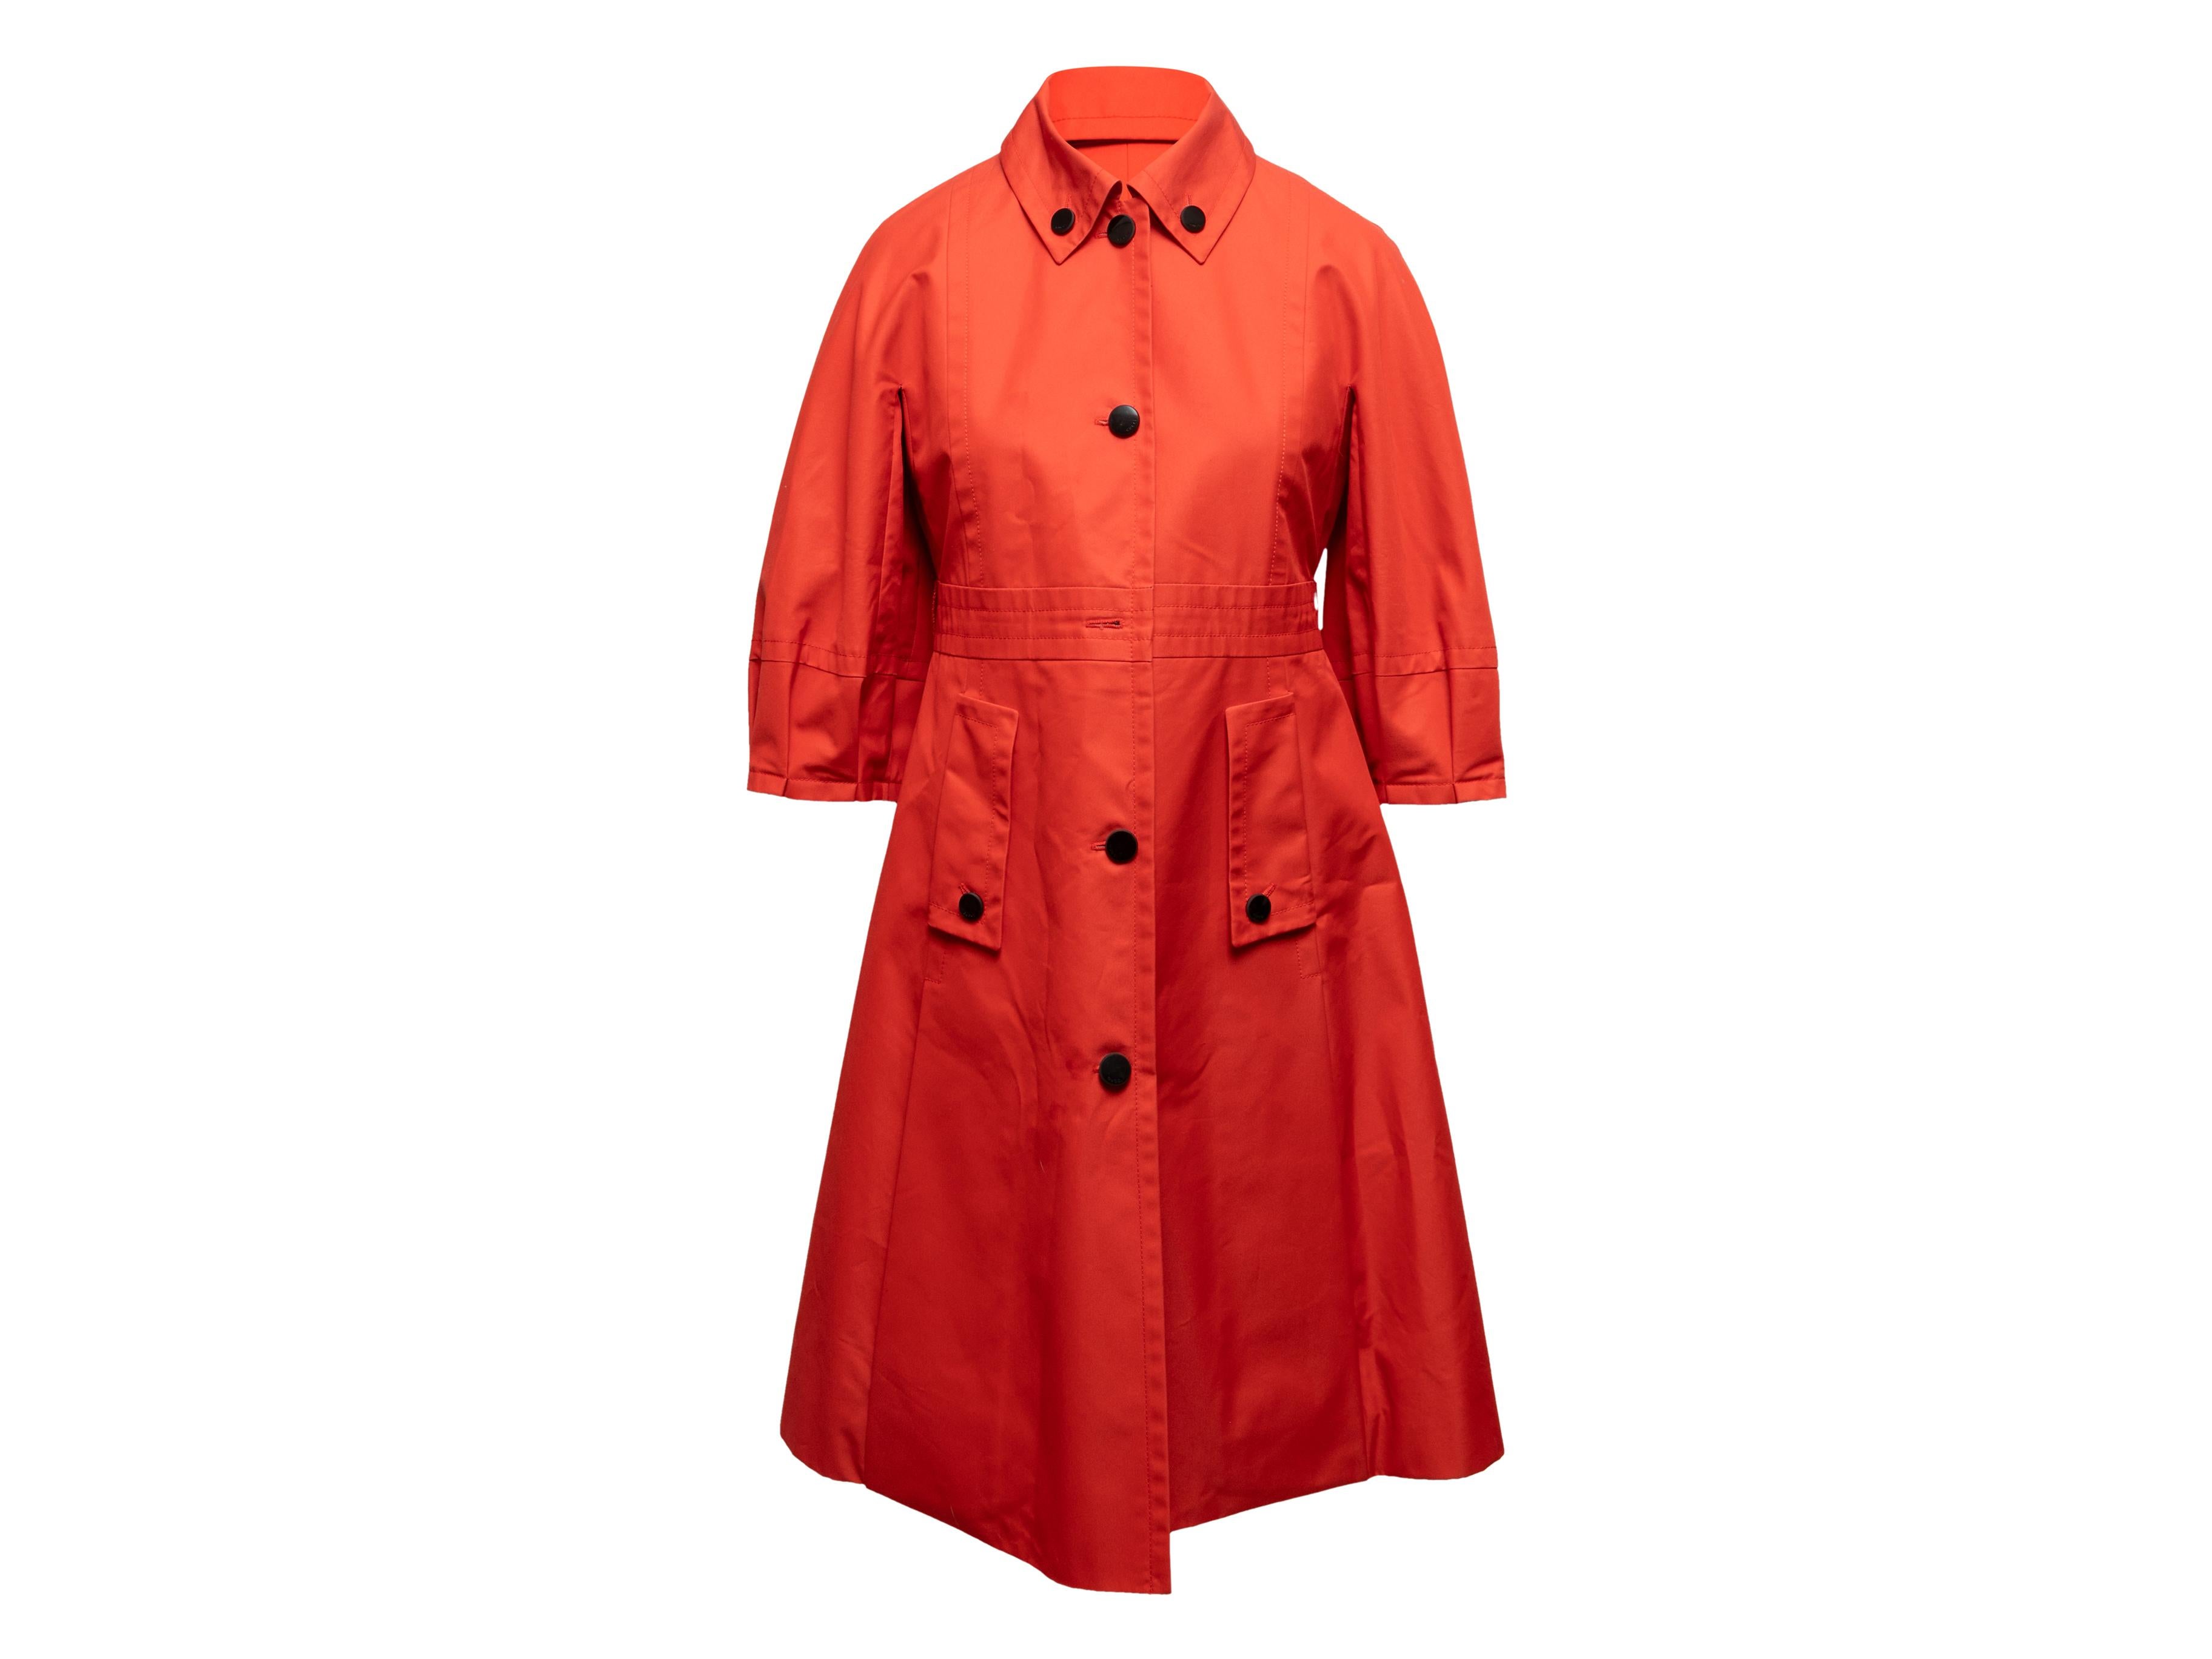 Blood Orange Gucci Three-Quarter Sleeve Trench Coat In Excellent Condition In New York, NY